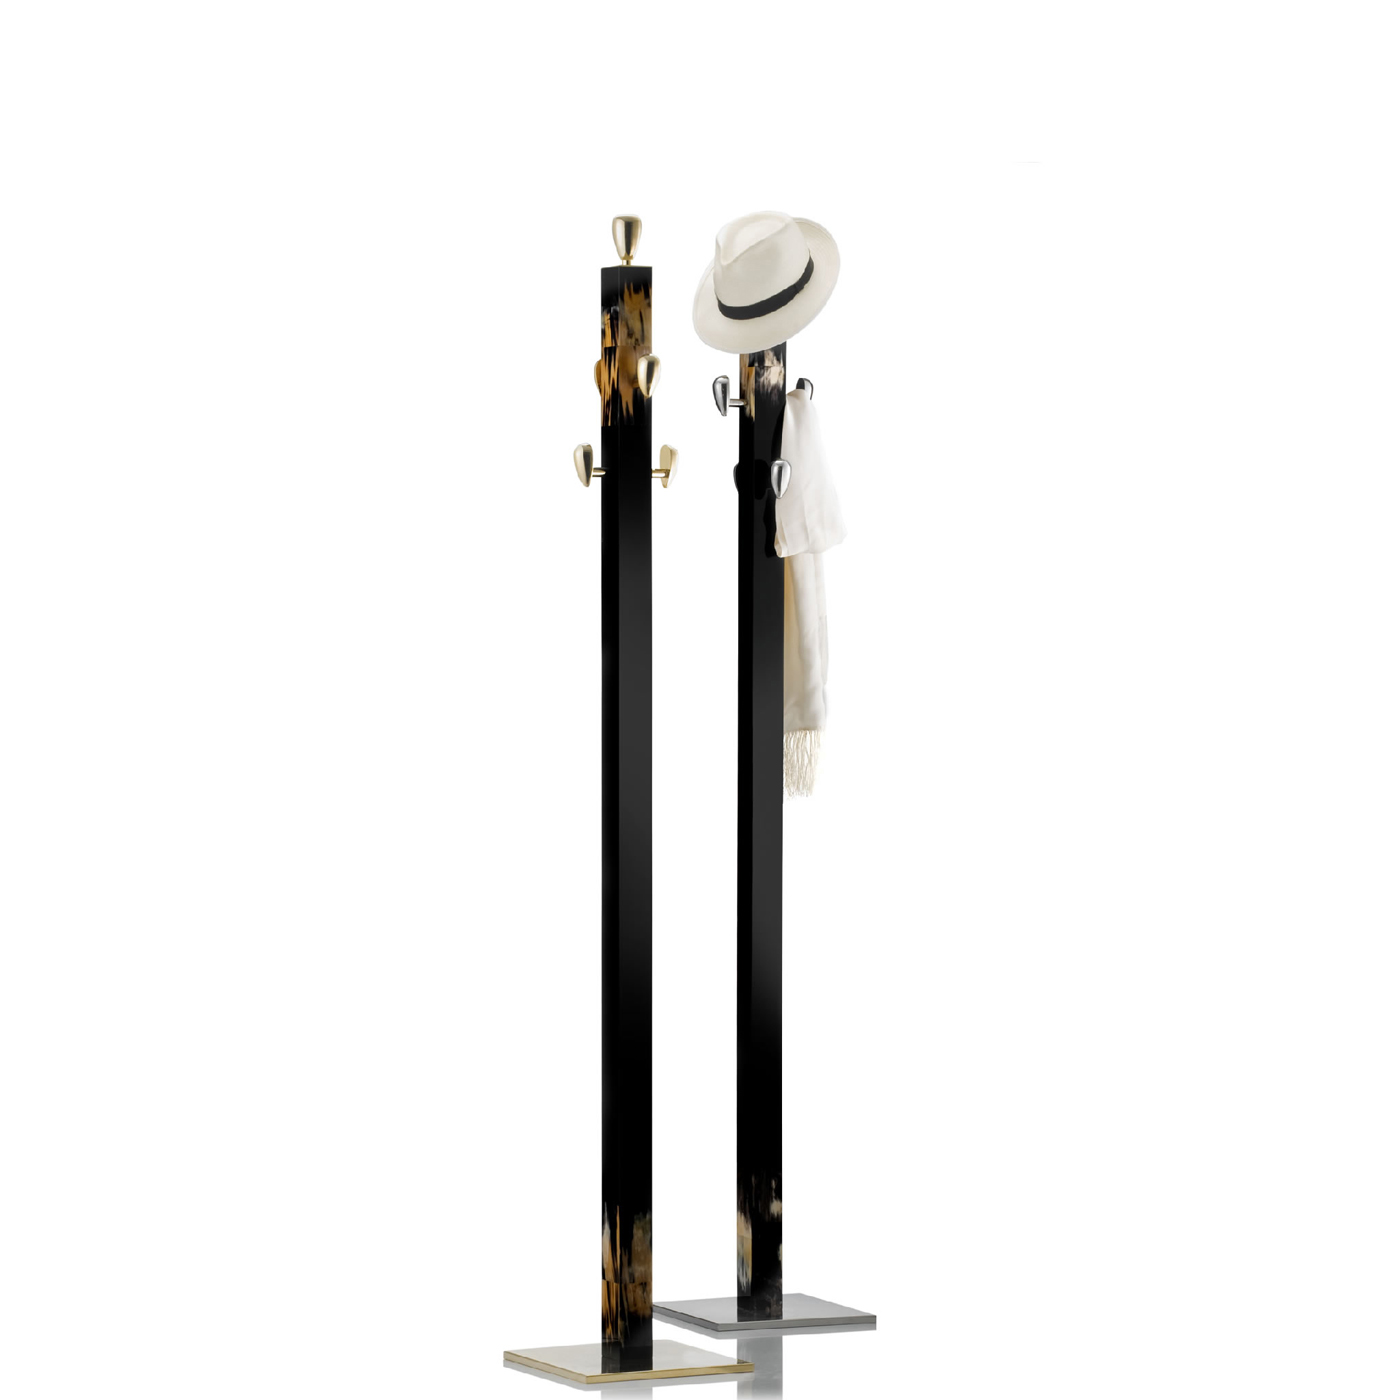 Coat stands and complementary furniture - Giglio coat stand in horn and lacquered wood with gloss finish - Arcahorn